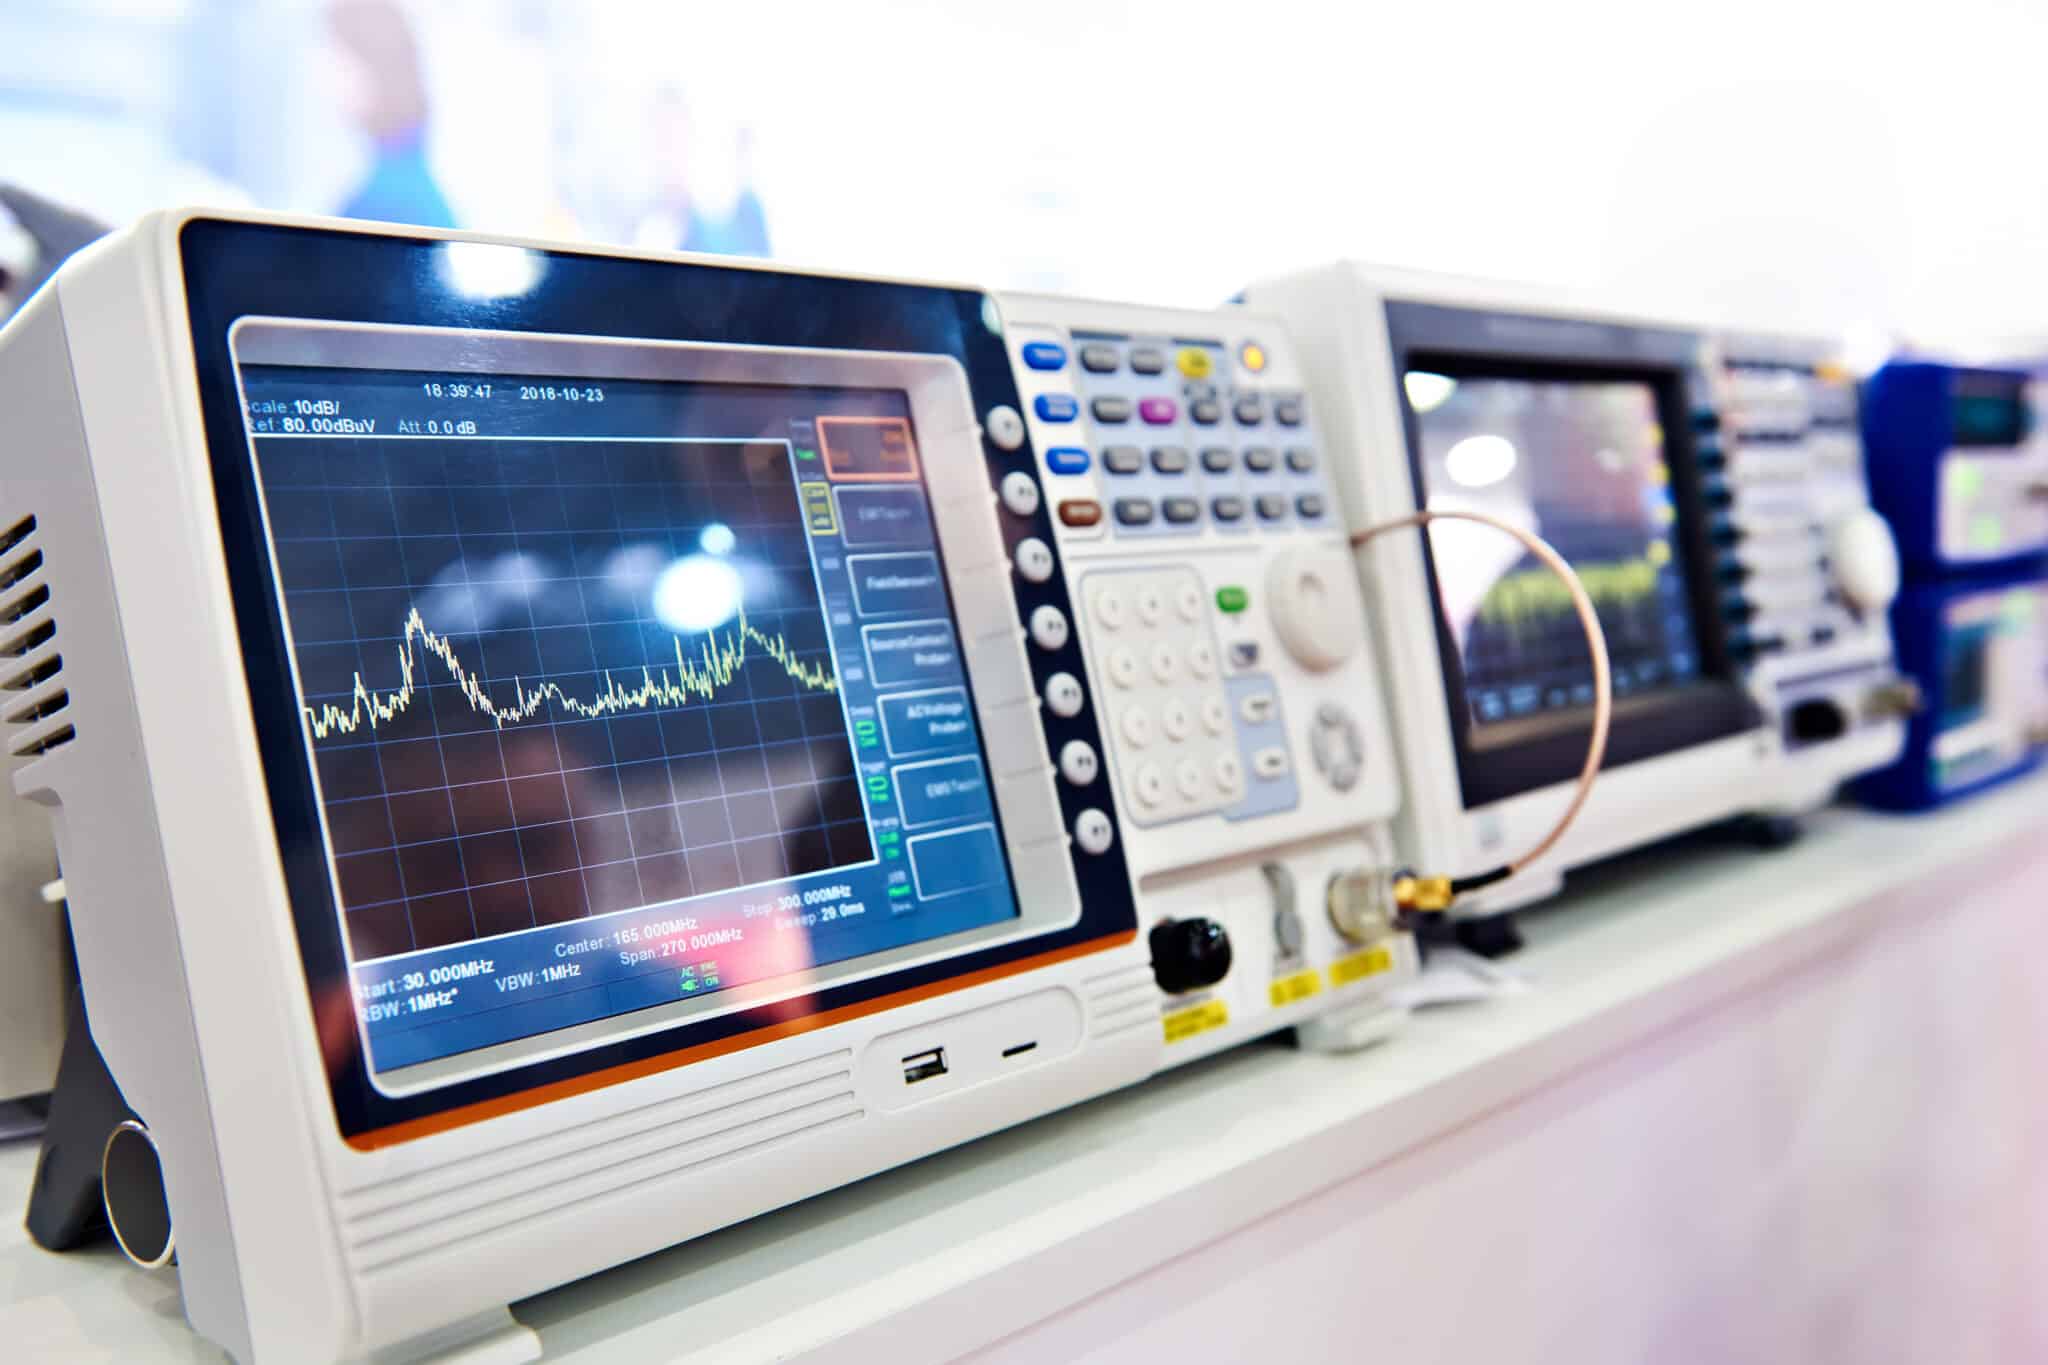 Digital spectrum analyzer and electronic devices